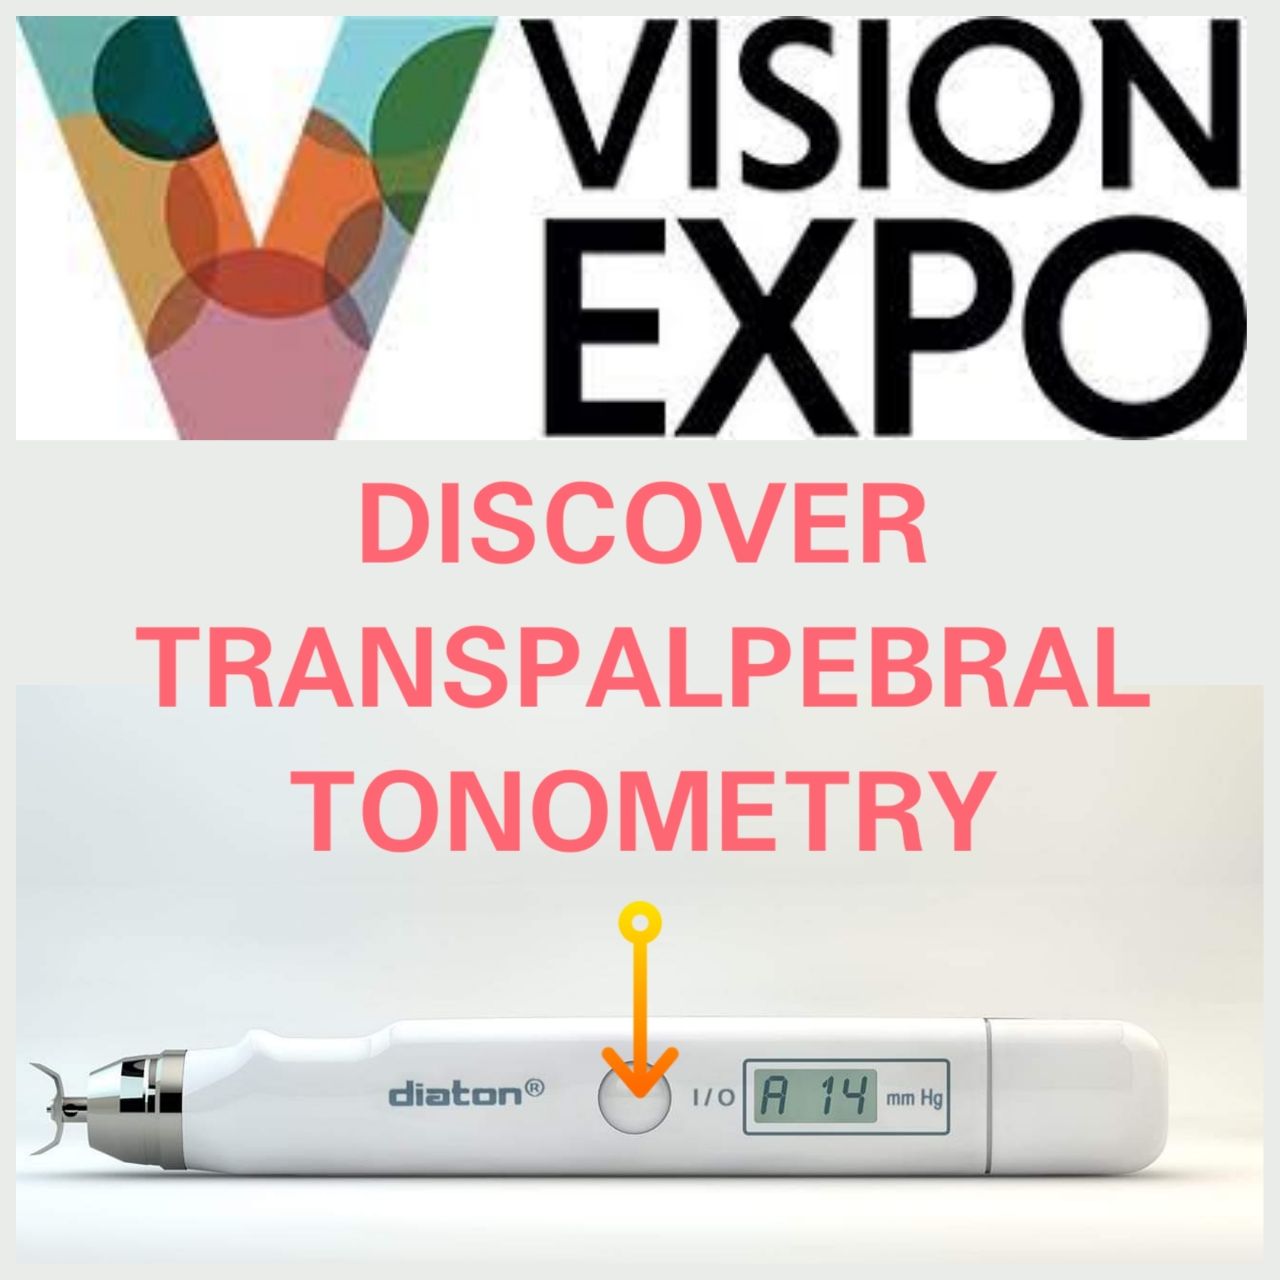 Tonometer DIATON Featured at Vision Expo in New York